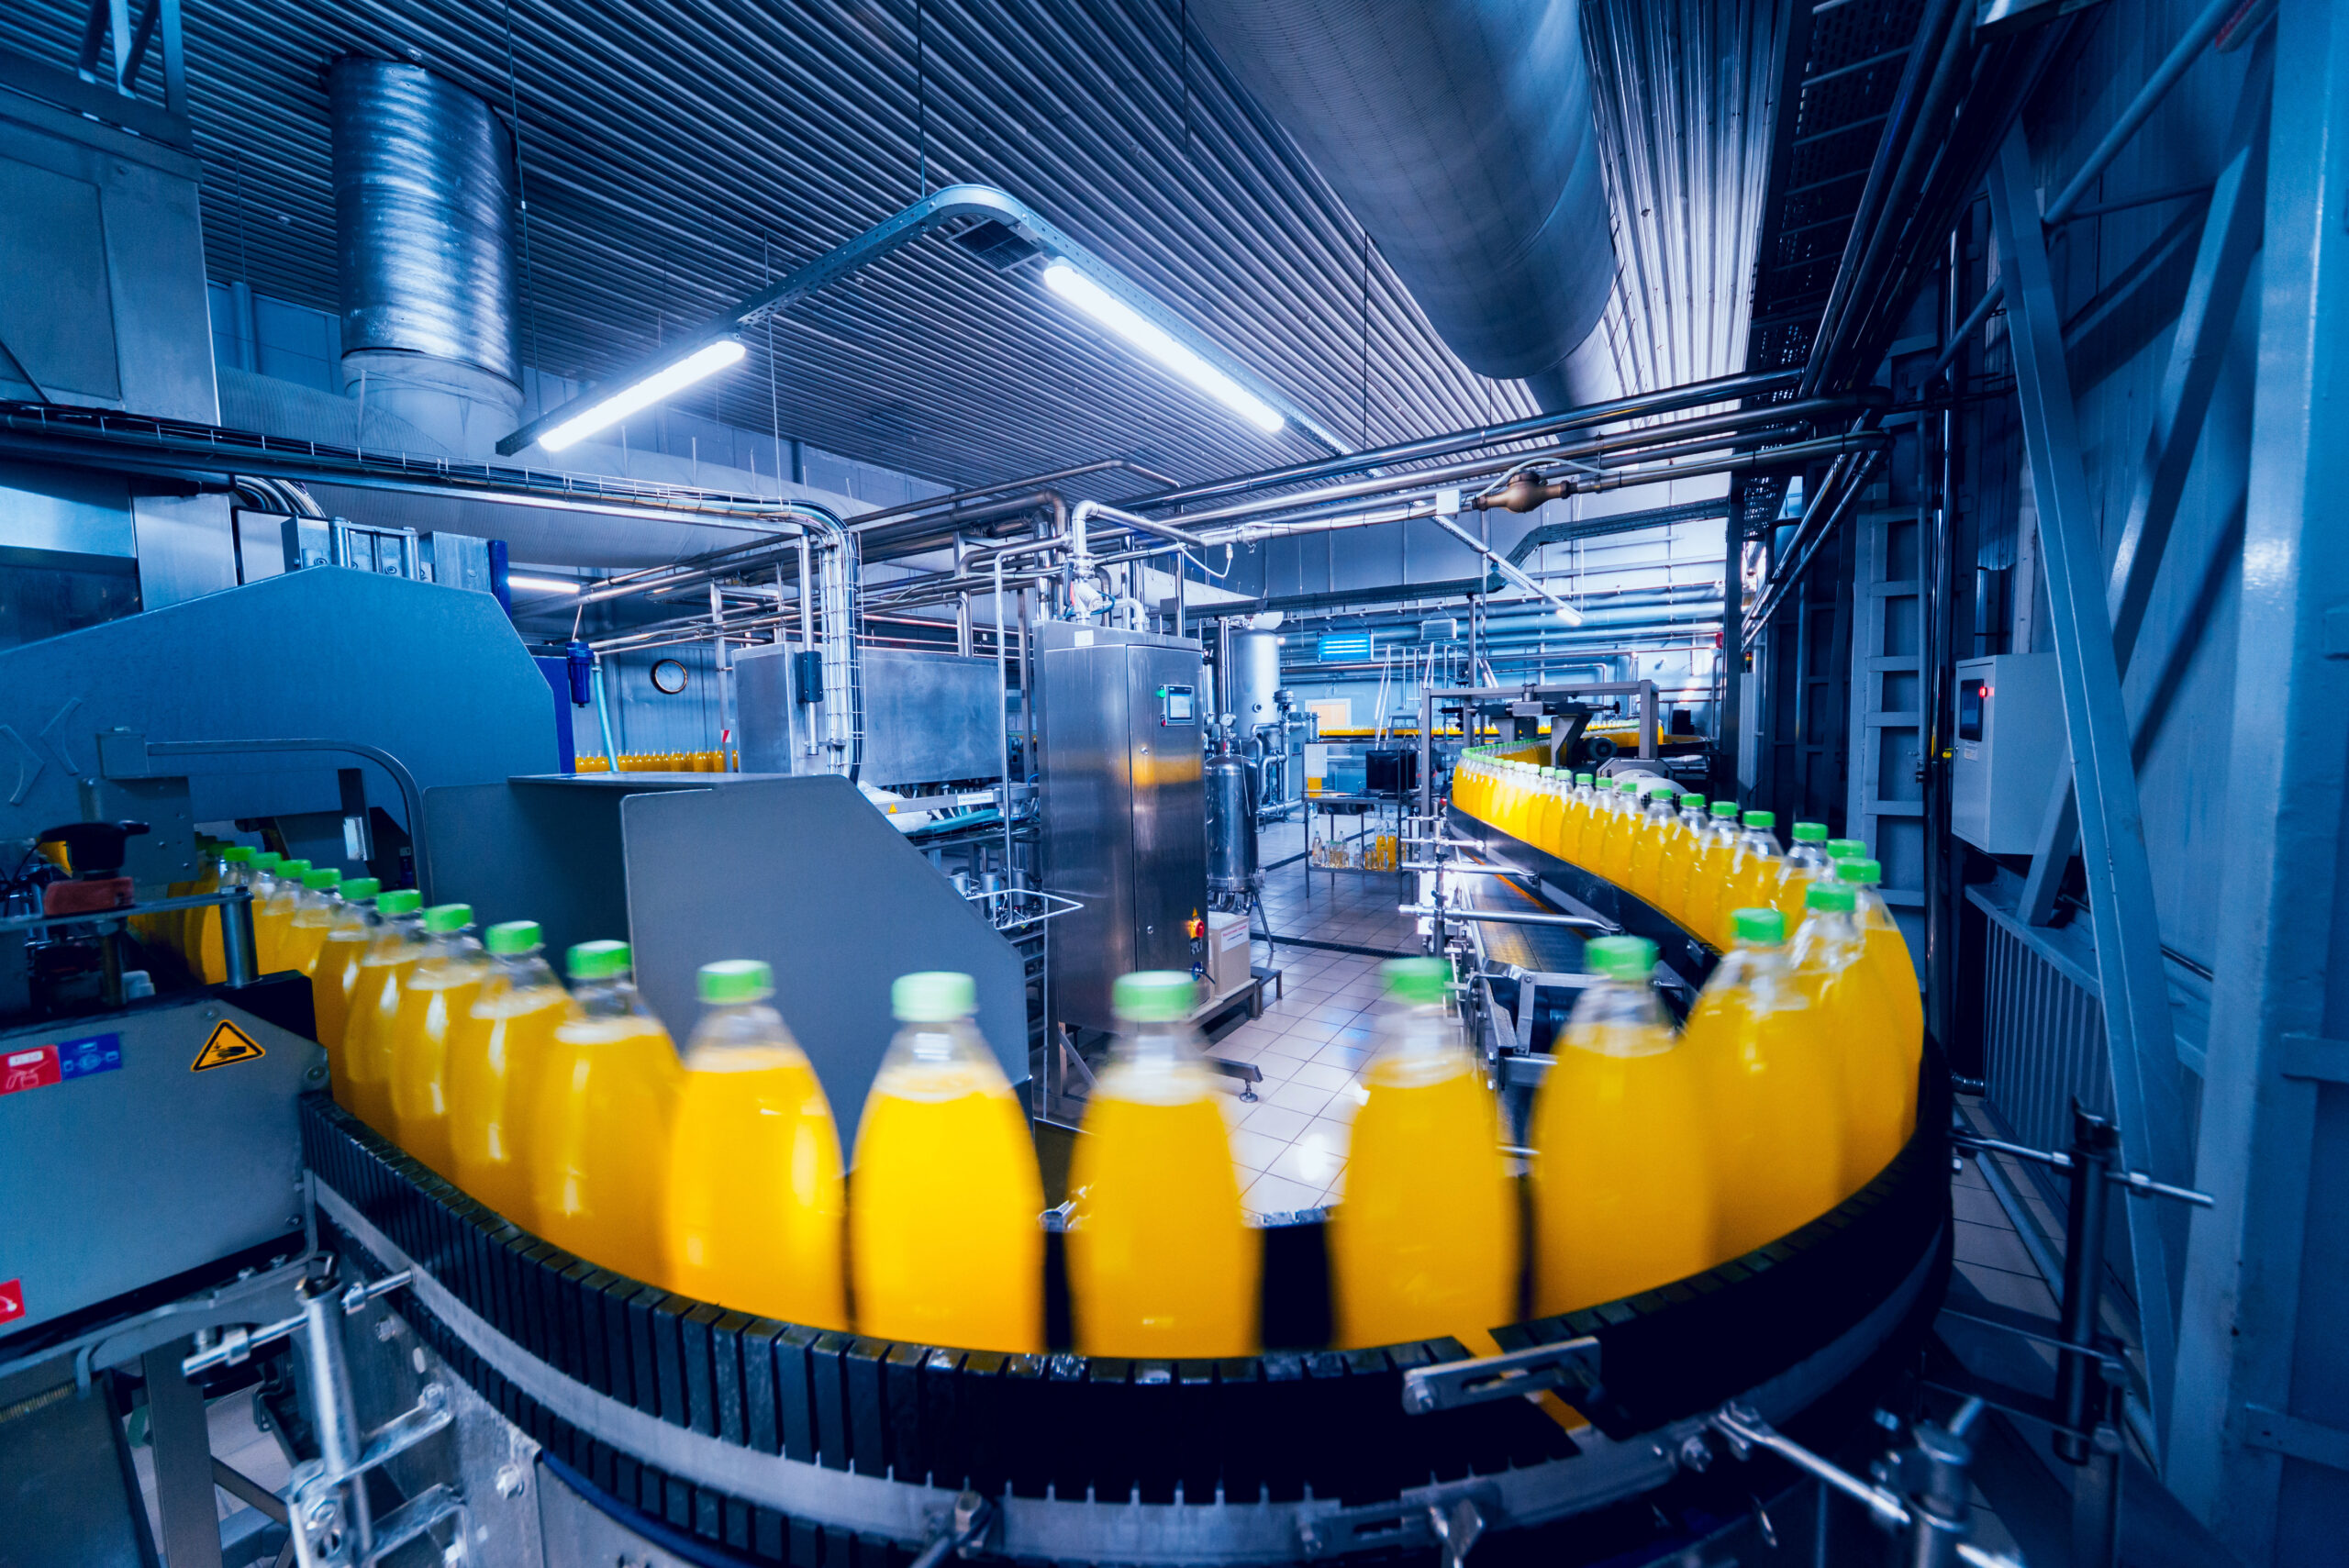 Beverage factory interior. Conveyor with bottles for juice or water. Equipments